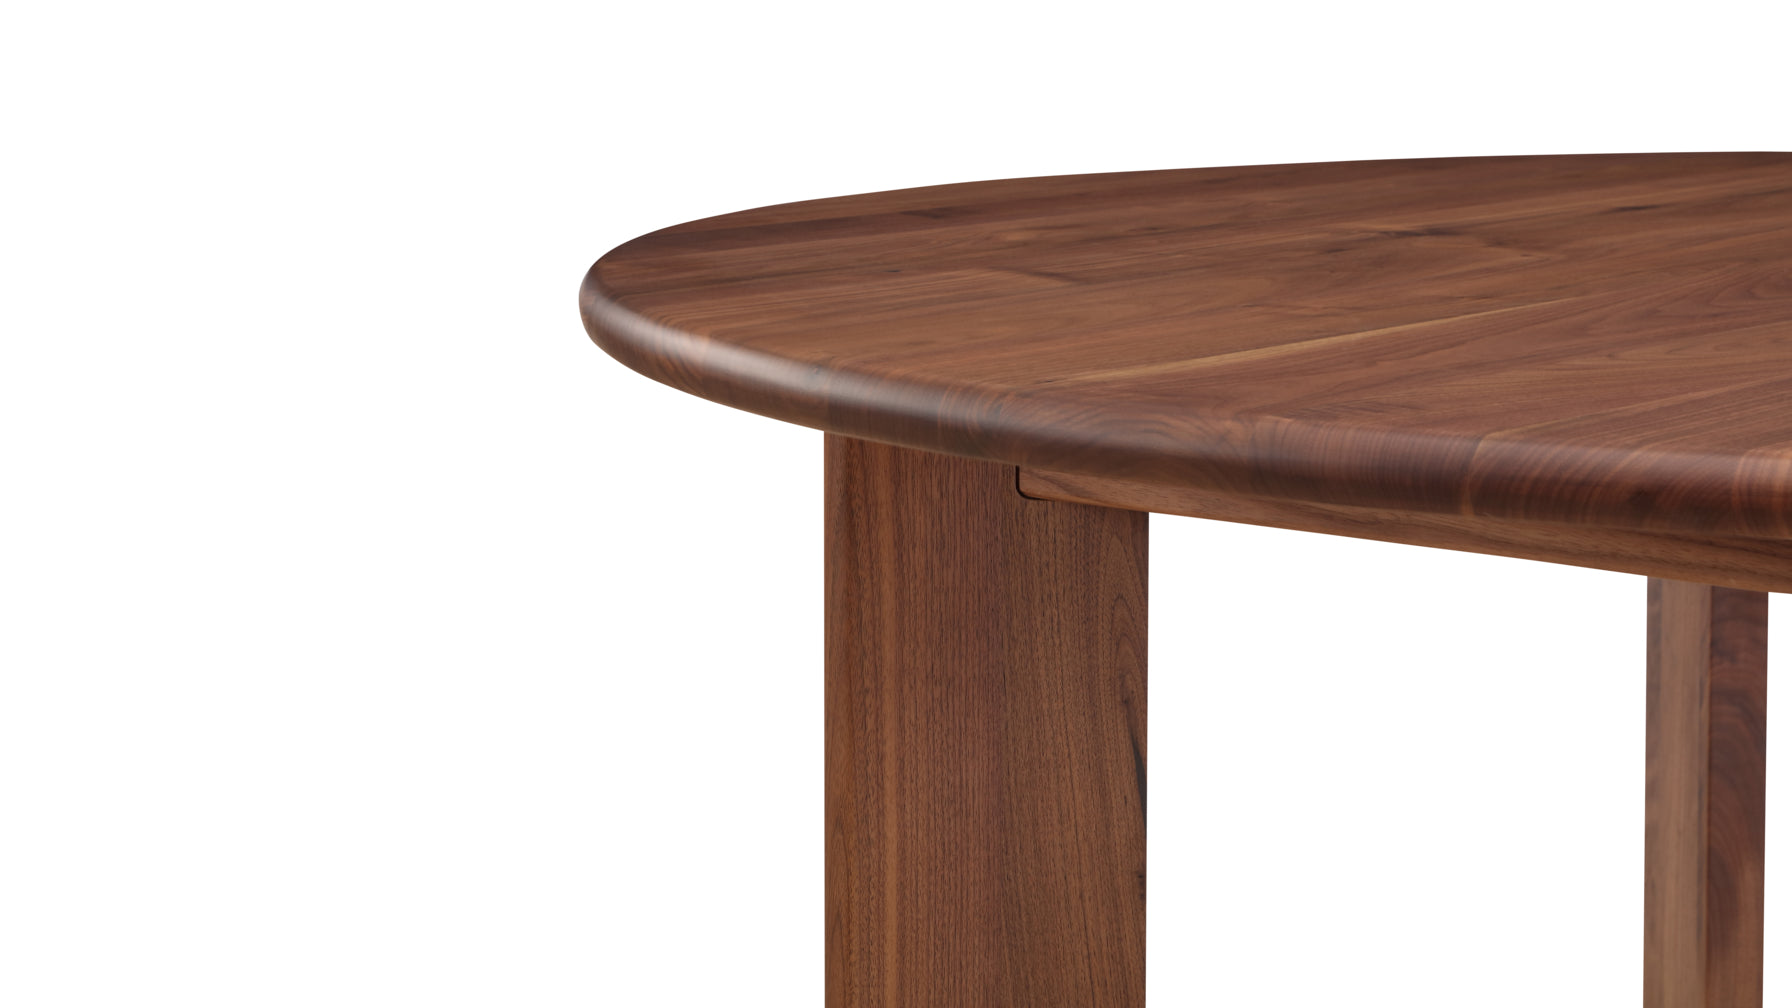 Frame Round Dining Table, Seats 4-5 People, American Walnut - Image 8